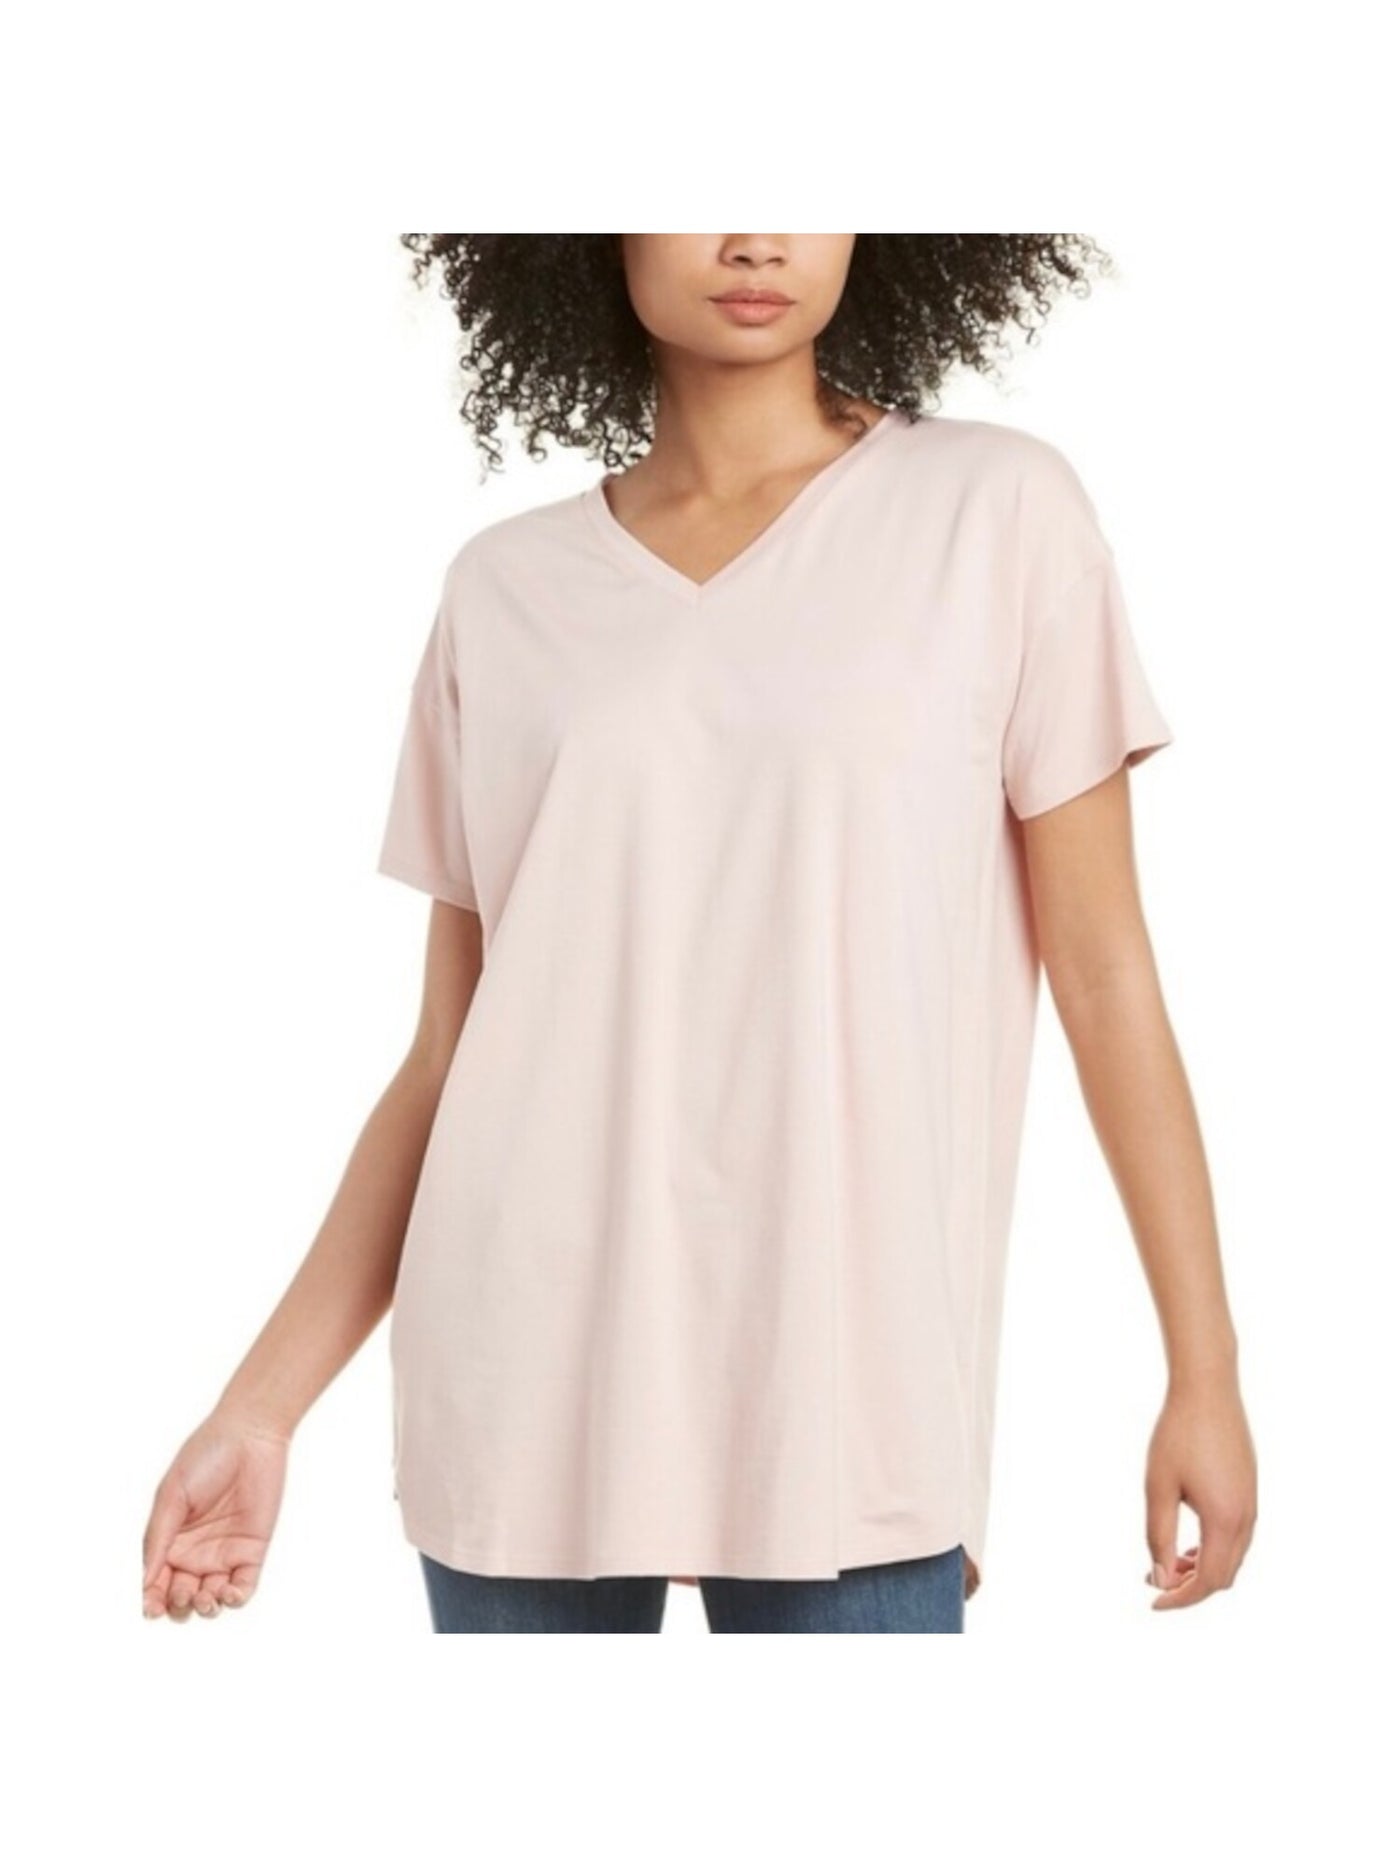 EILEEN FISHER Womens Pink V Neck Tunic Top S